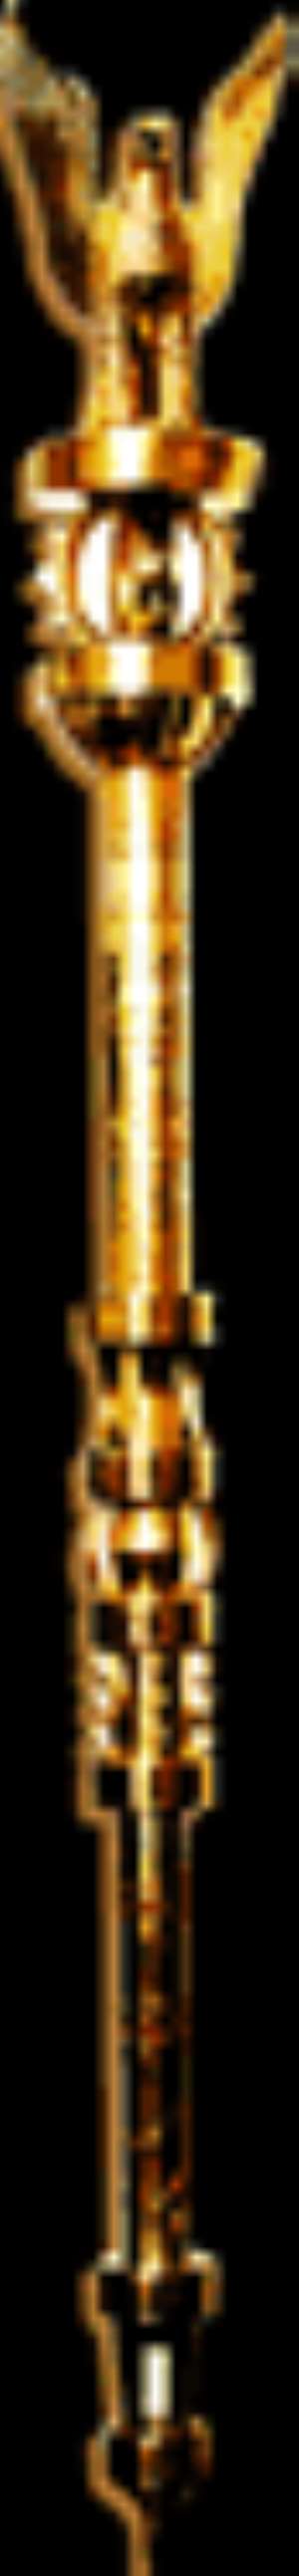 The Mace, the symbol of Parliament's authority